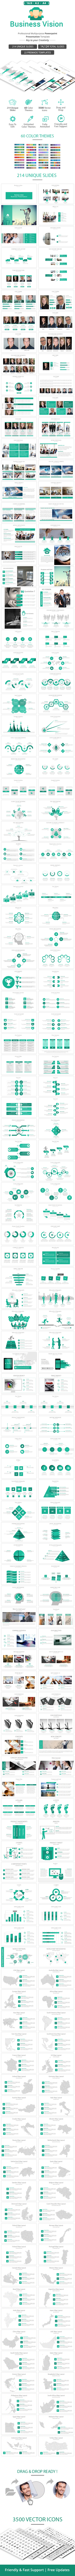 Business vision PowerPoint Presentation Template